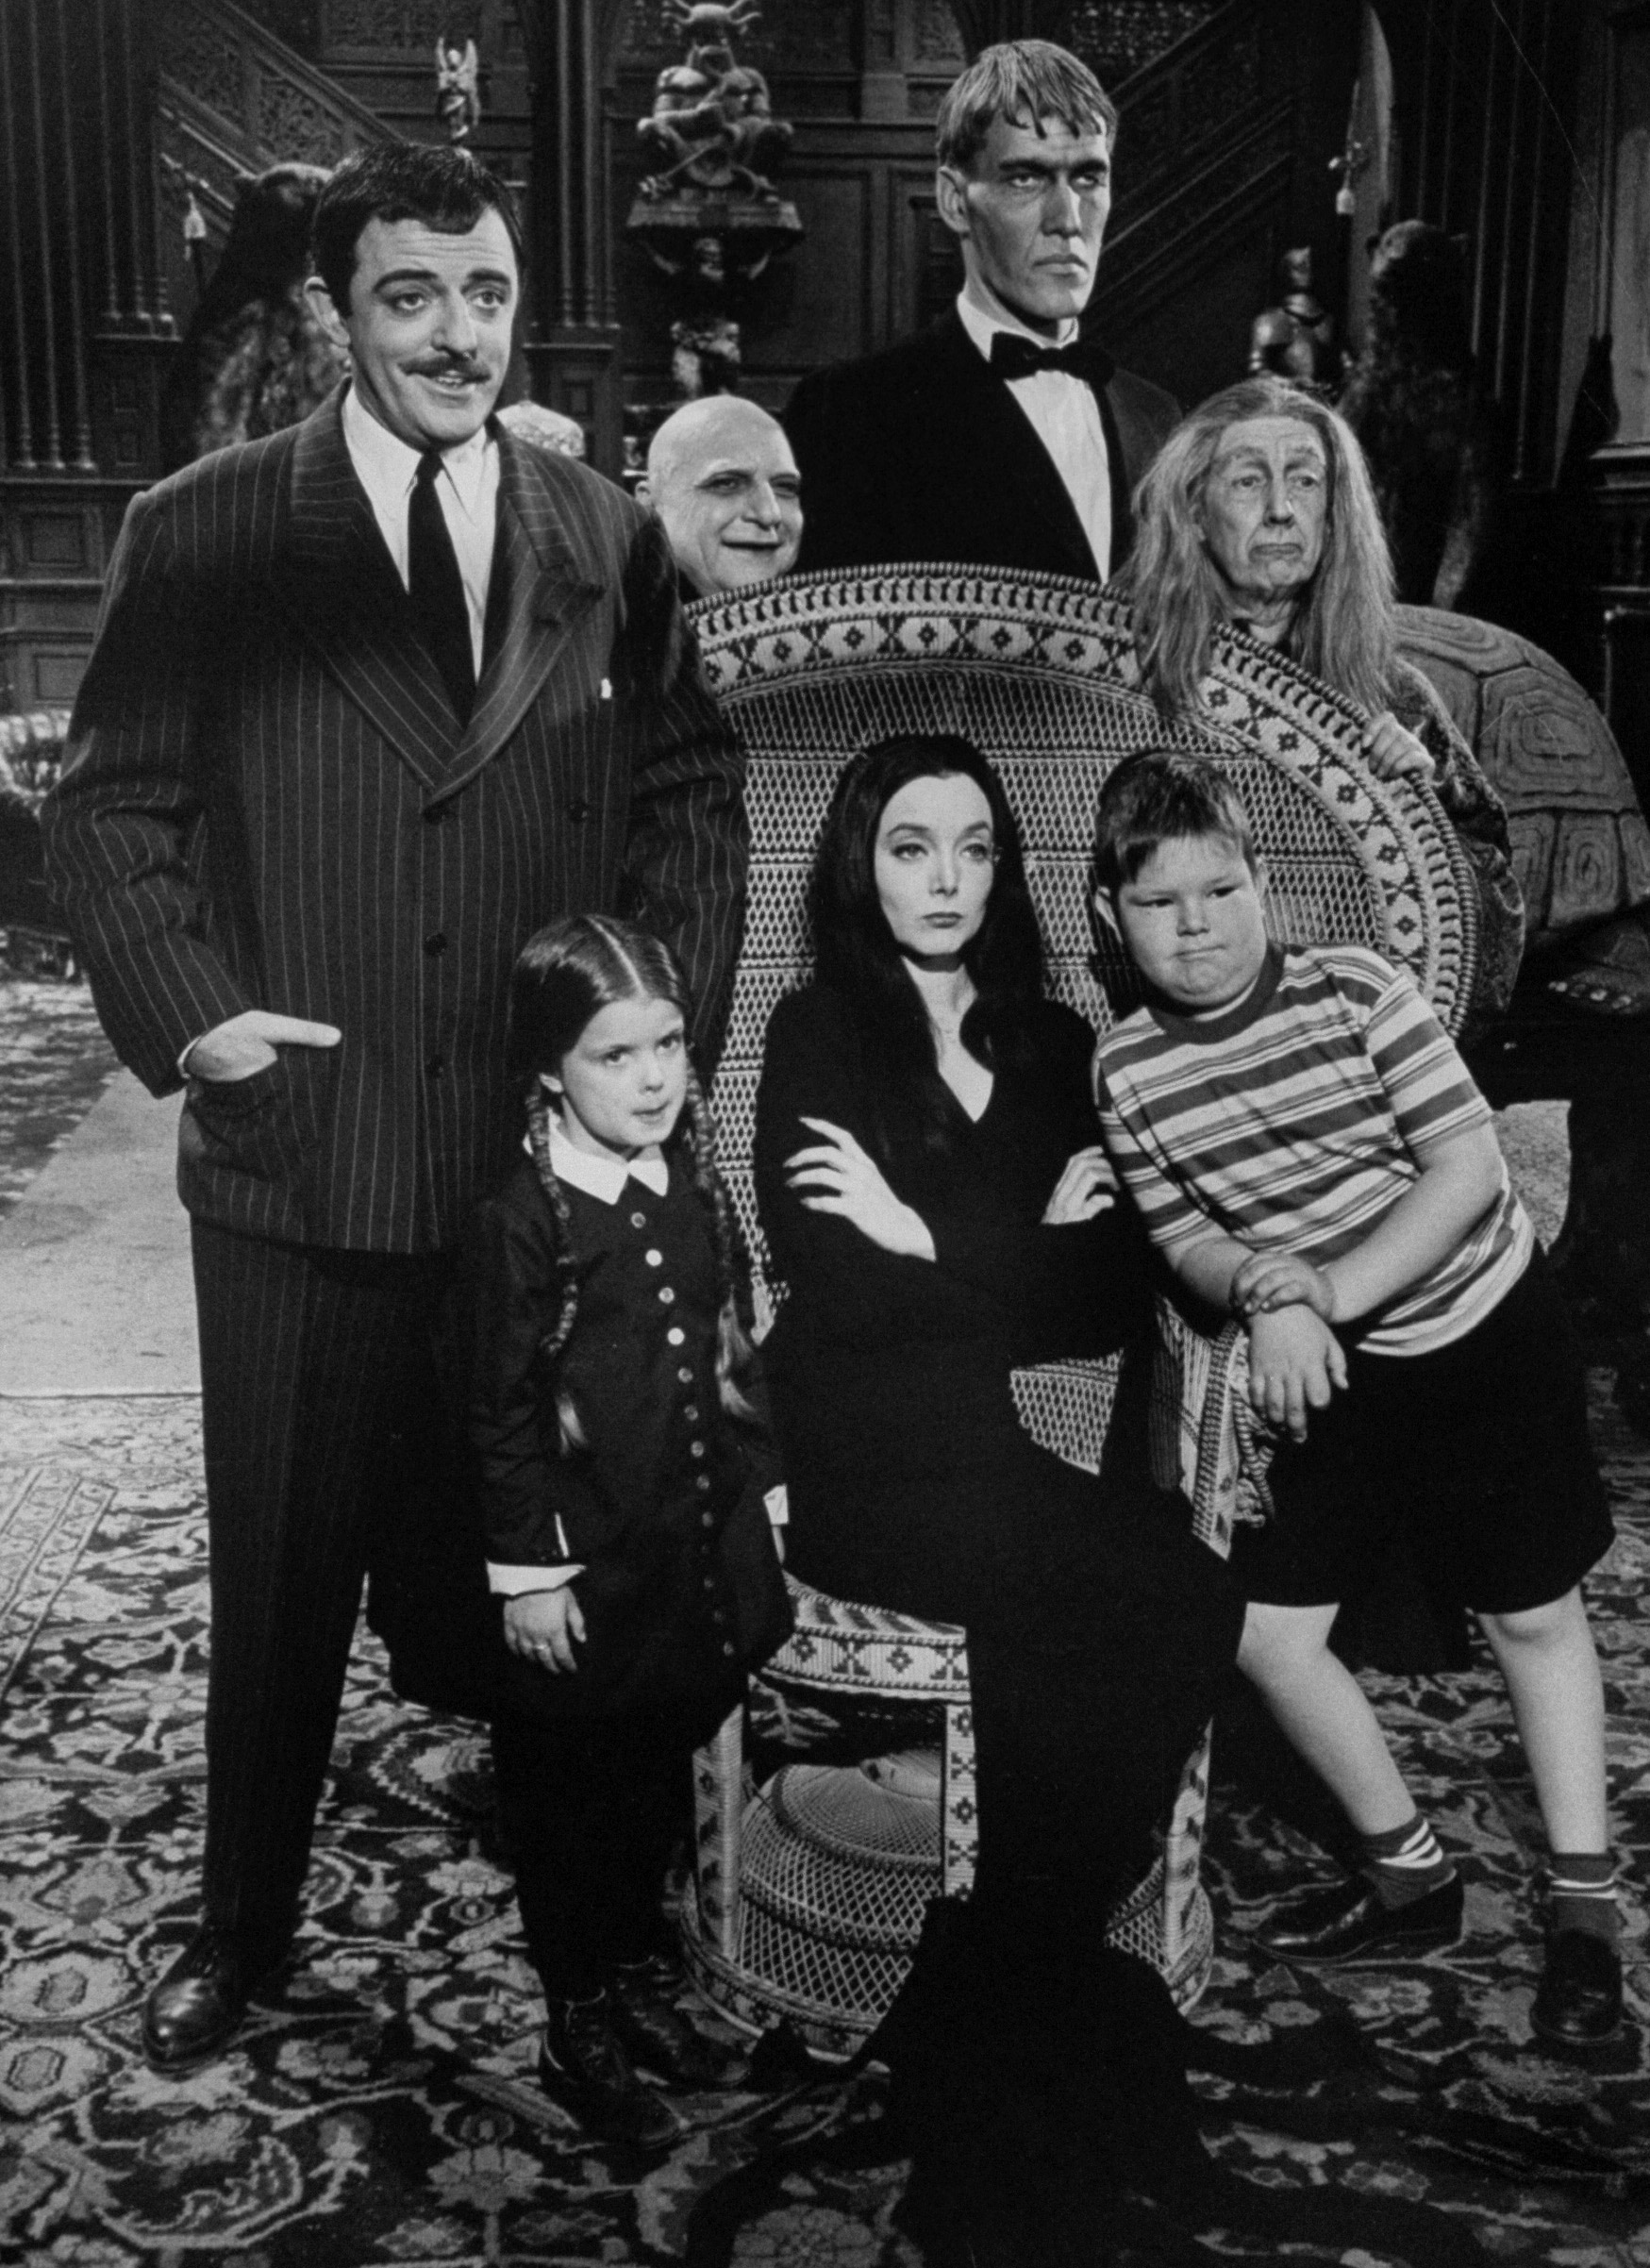 Carolyn Jones and John Astin, with other cast members, from The Addams Family.